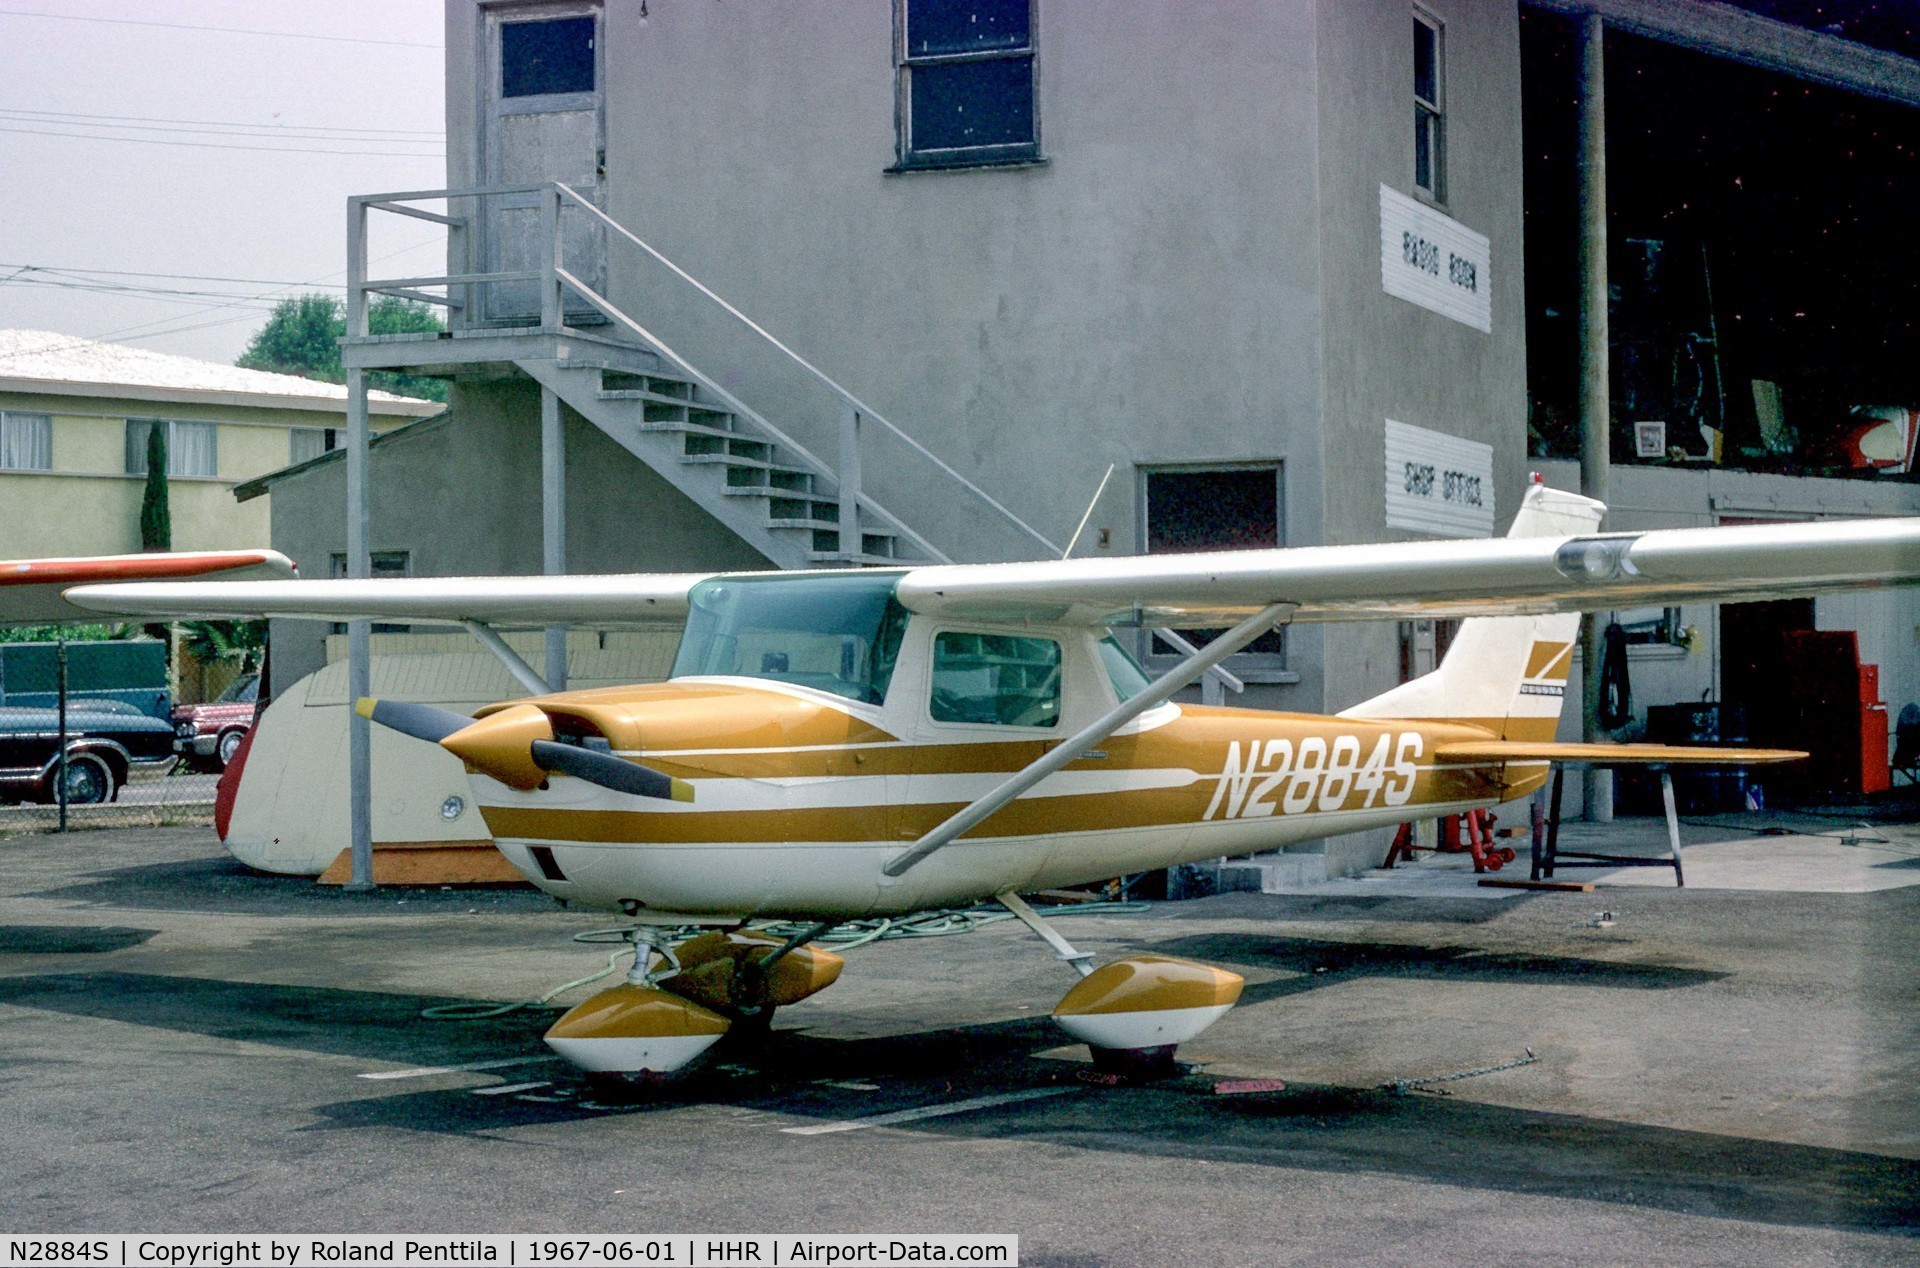 N2884S, Piper PA-28-161 C/N 287916509, Rose Aviation Shop area on Hawthorne Airport in 1967.  N2884S was new to the FBO's fleet.